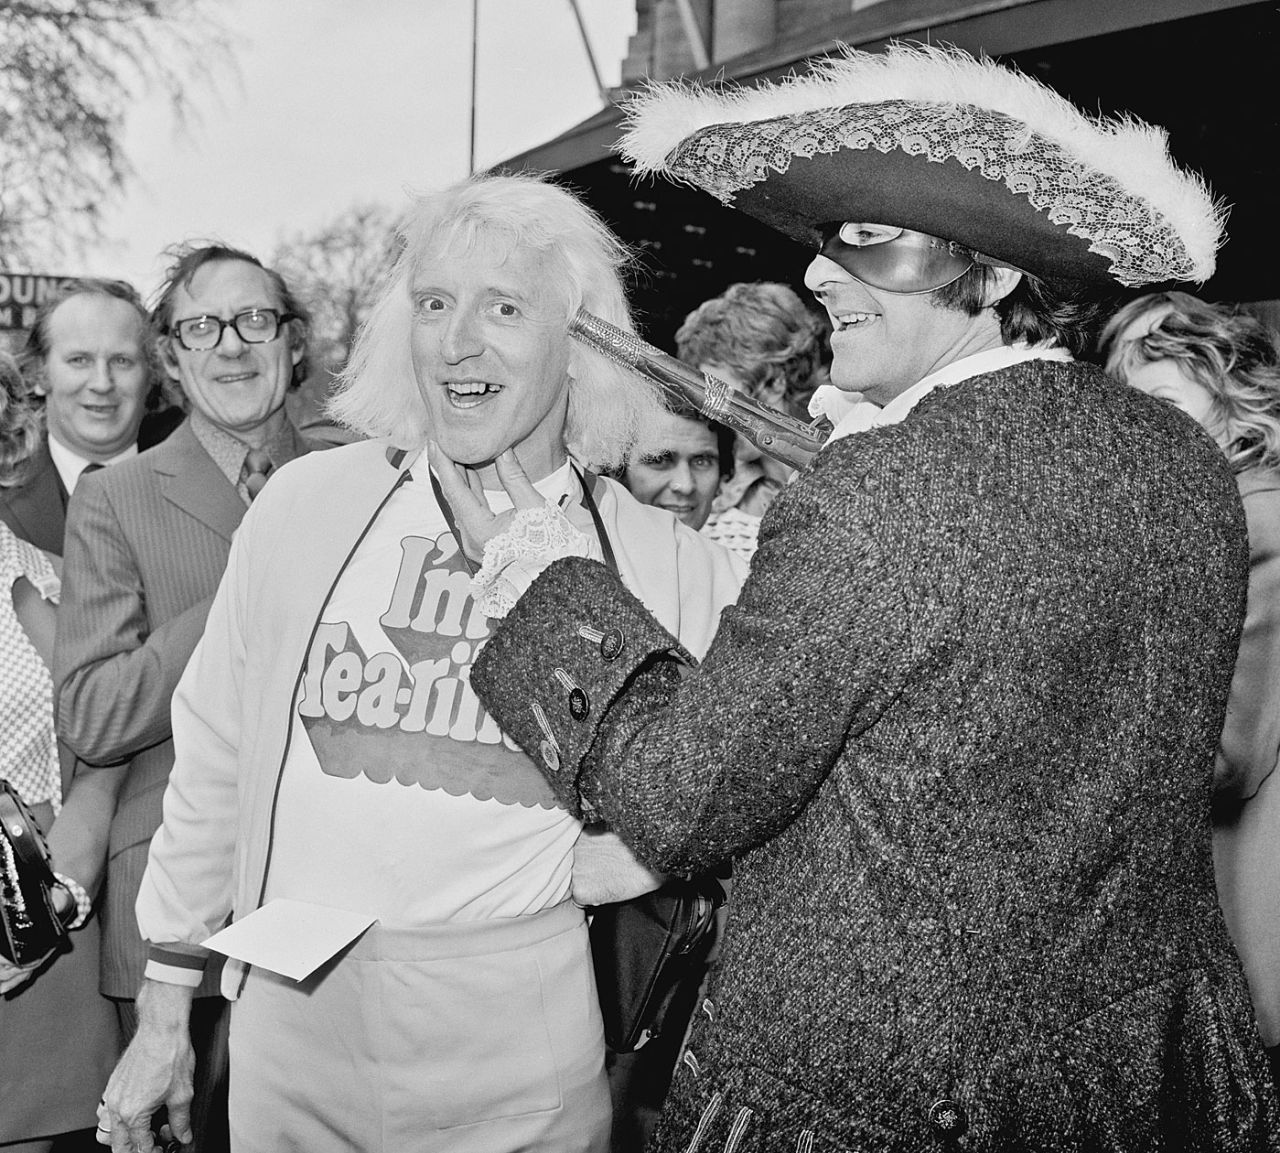 Fred Trueman with Jimmy Savile during a Variety Club of Great Britain charity walk luncheon, England, April 19, 1973